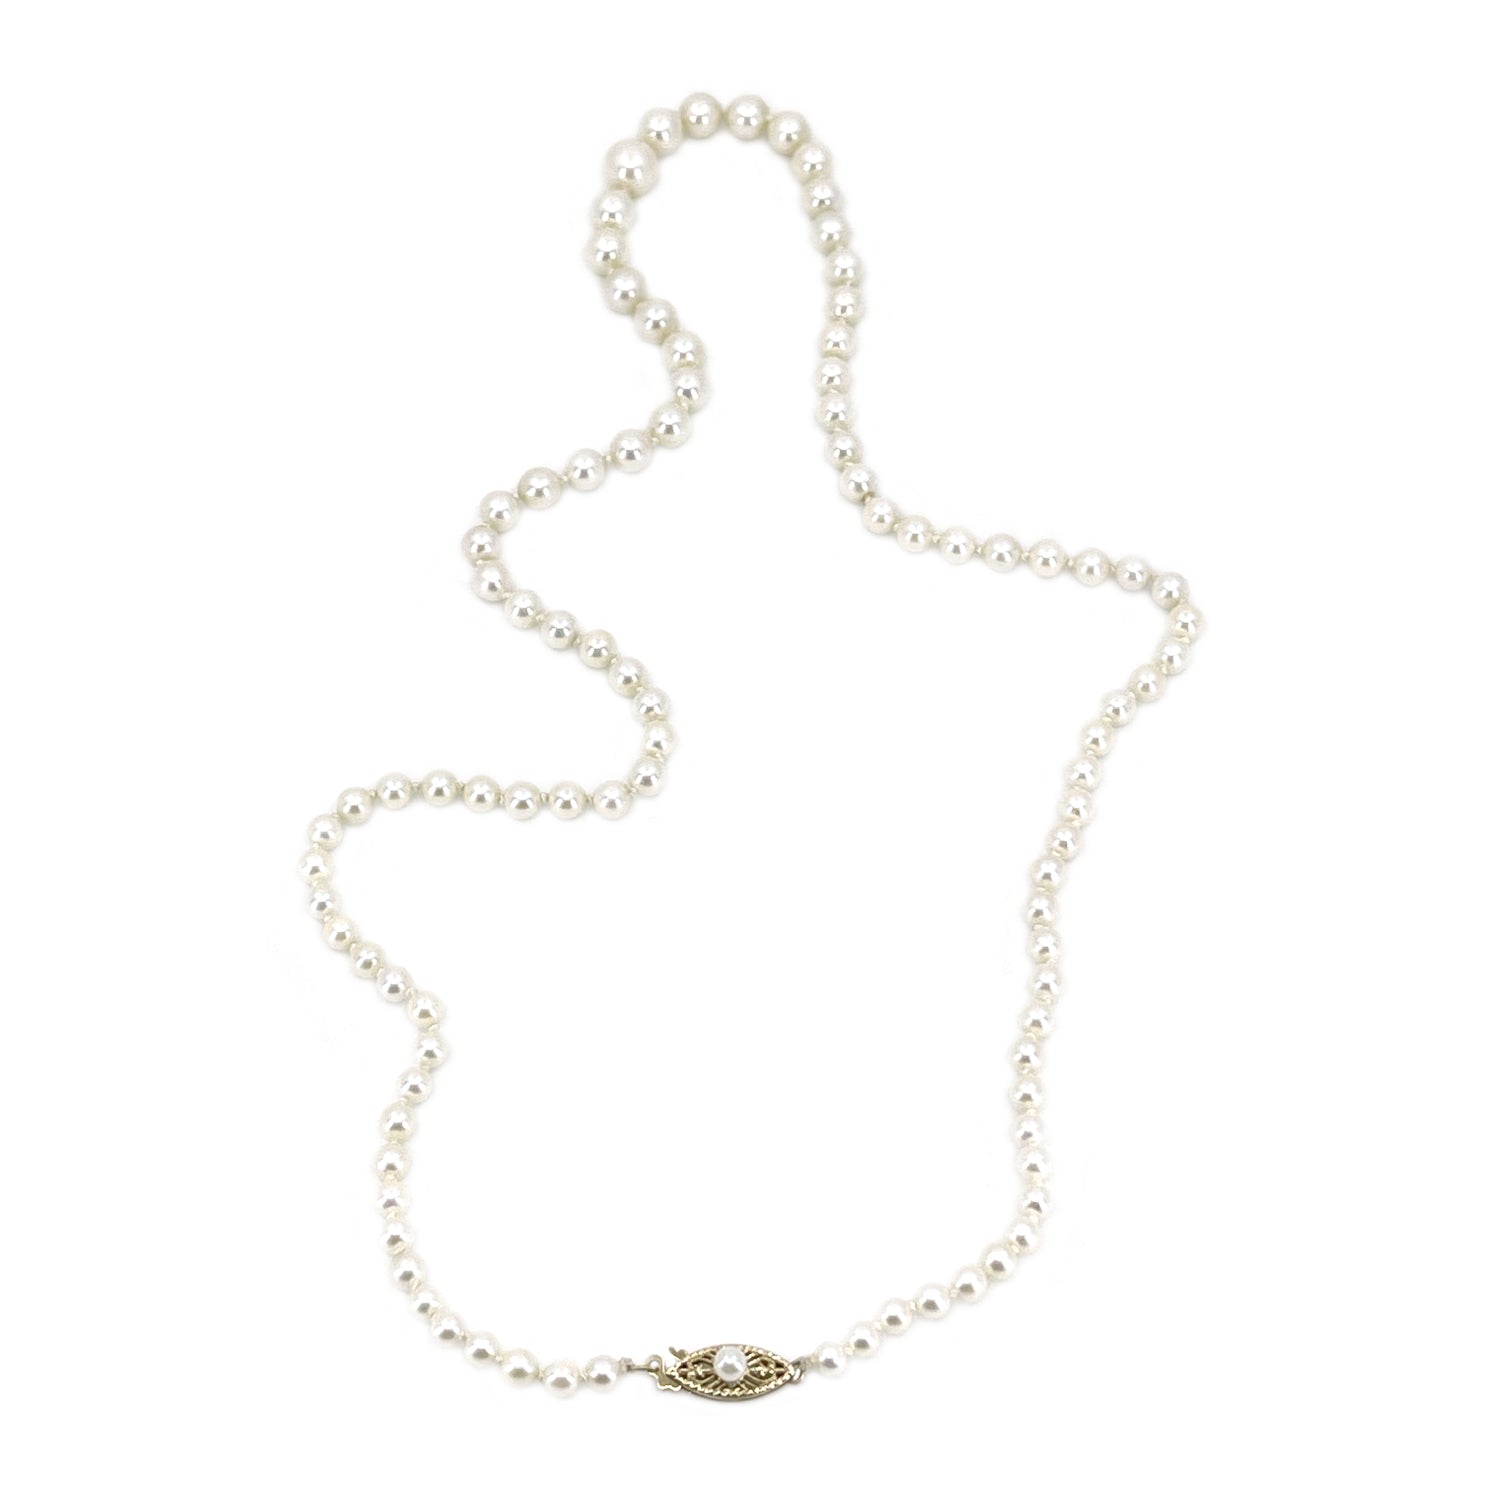 Filigree Mid-Century Japanese Saltwater Cultured Akoya Pearl Vintage Graduated Strand - 14K Yellow Gold 20.75 Inch